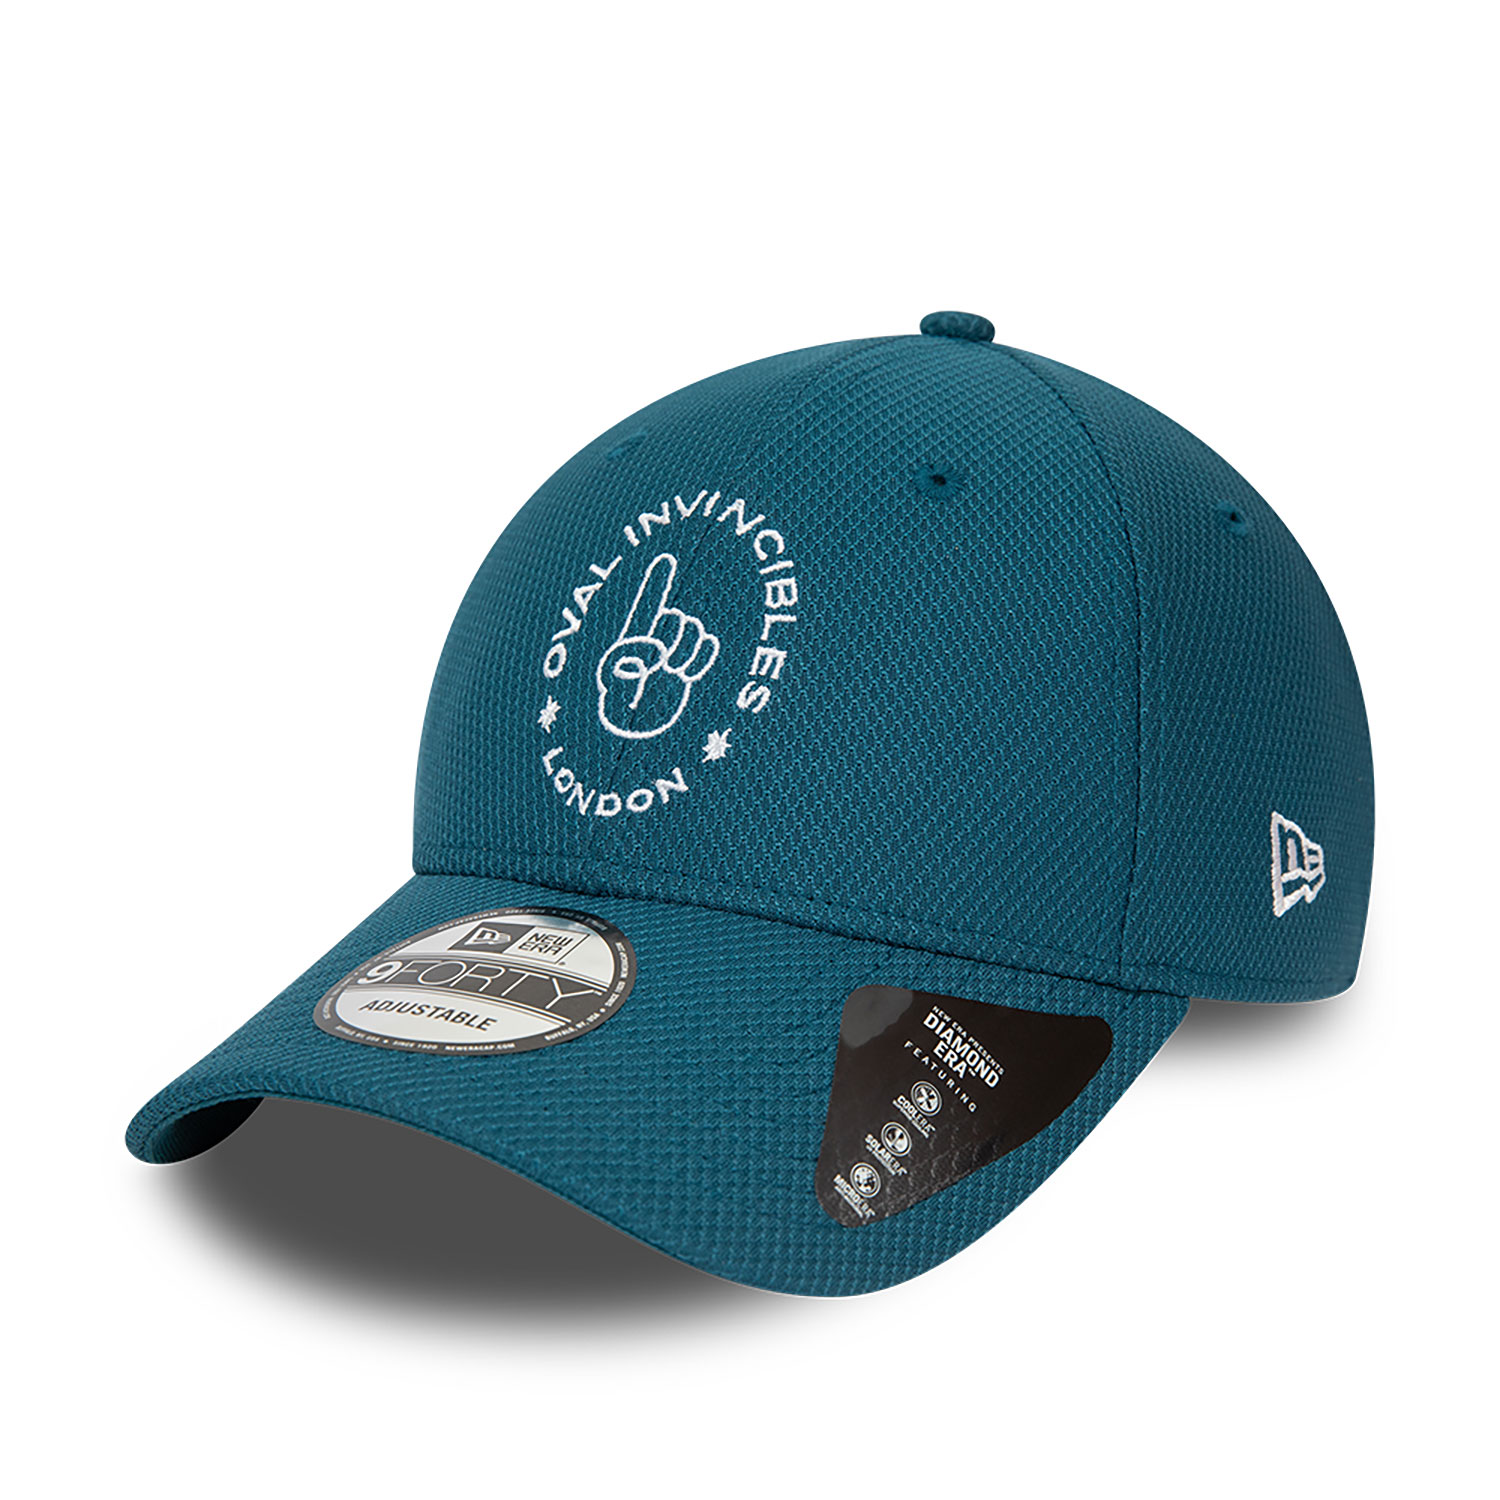 Gorra New Era Oval Invincibles The Hundred 39THIRTY Stretch Fit